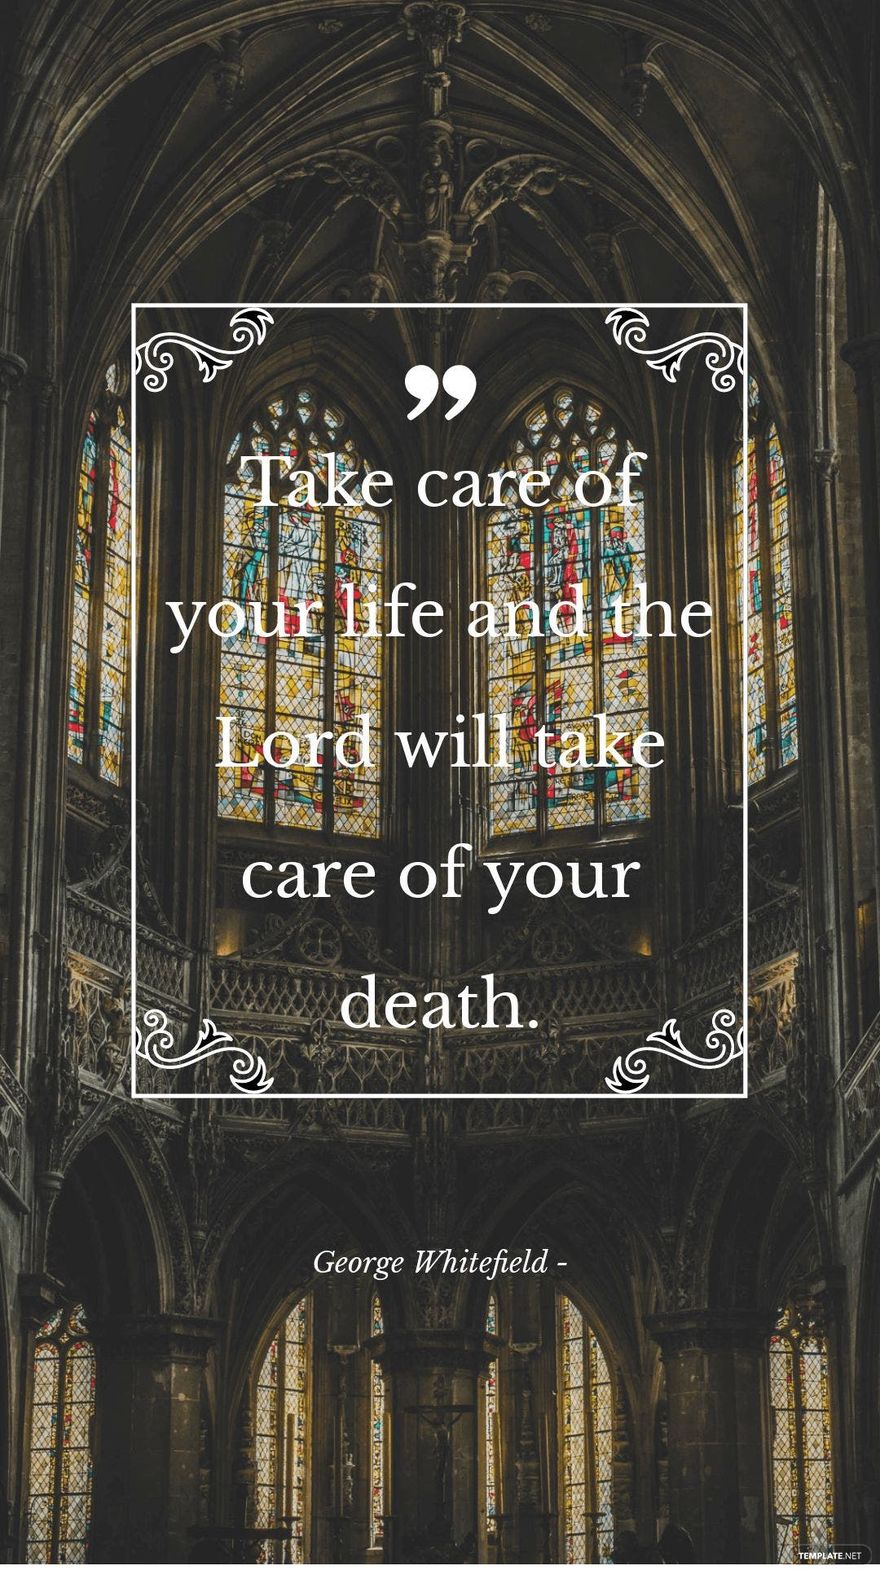 George Whitefield - Take care of your life and the Lord will take care of your death.